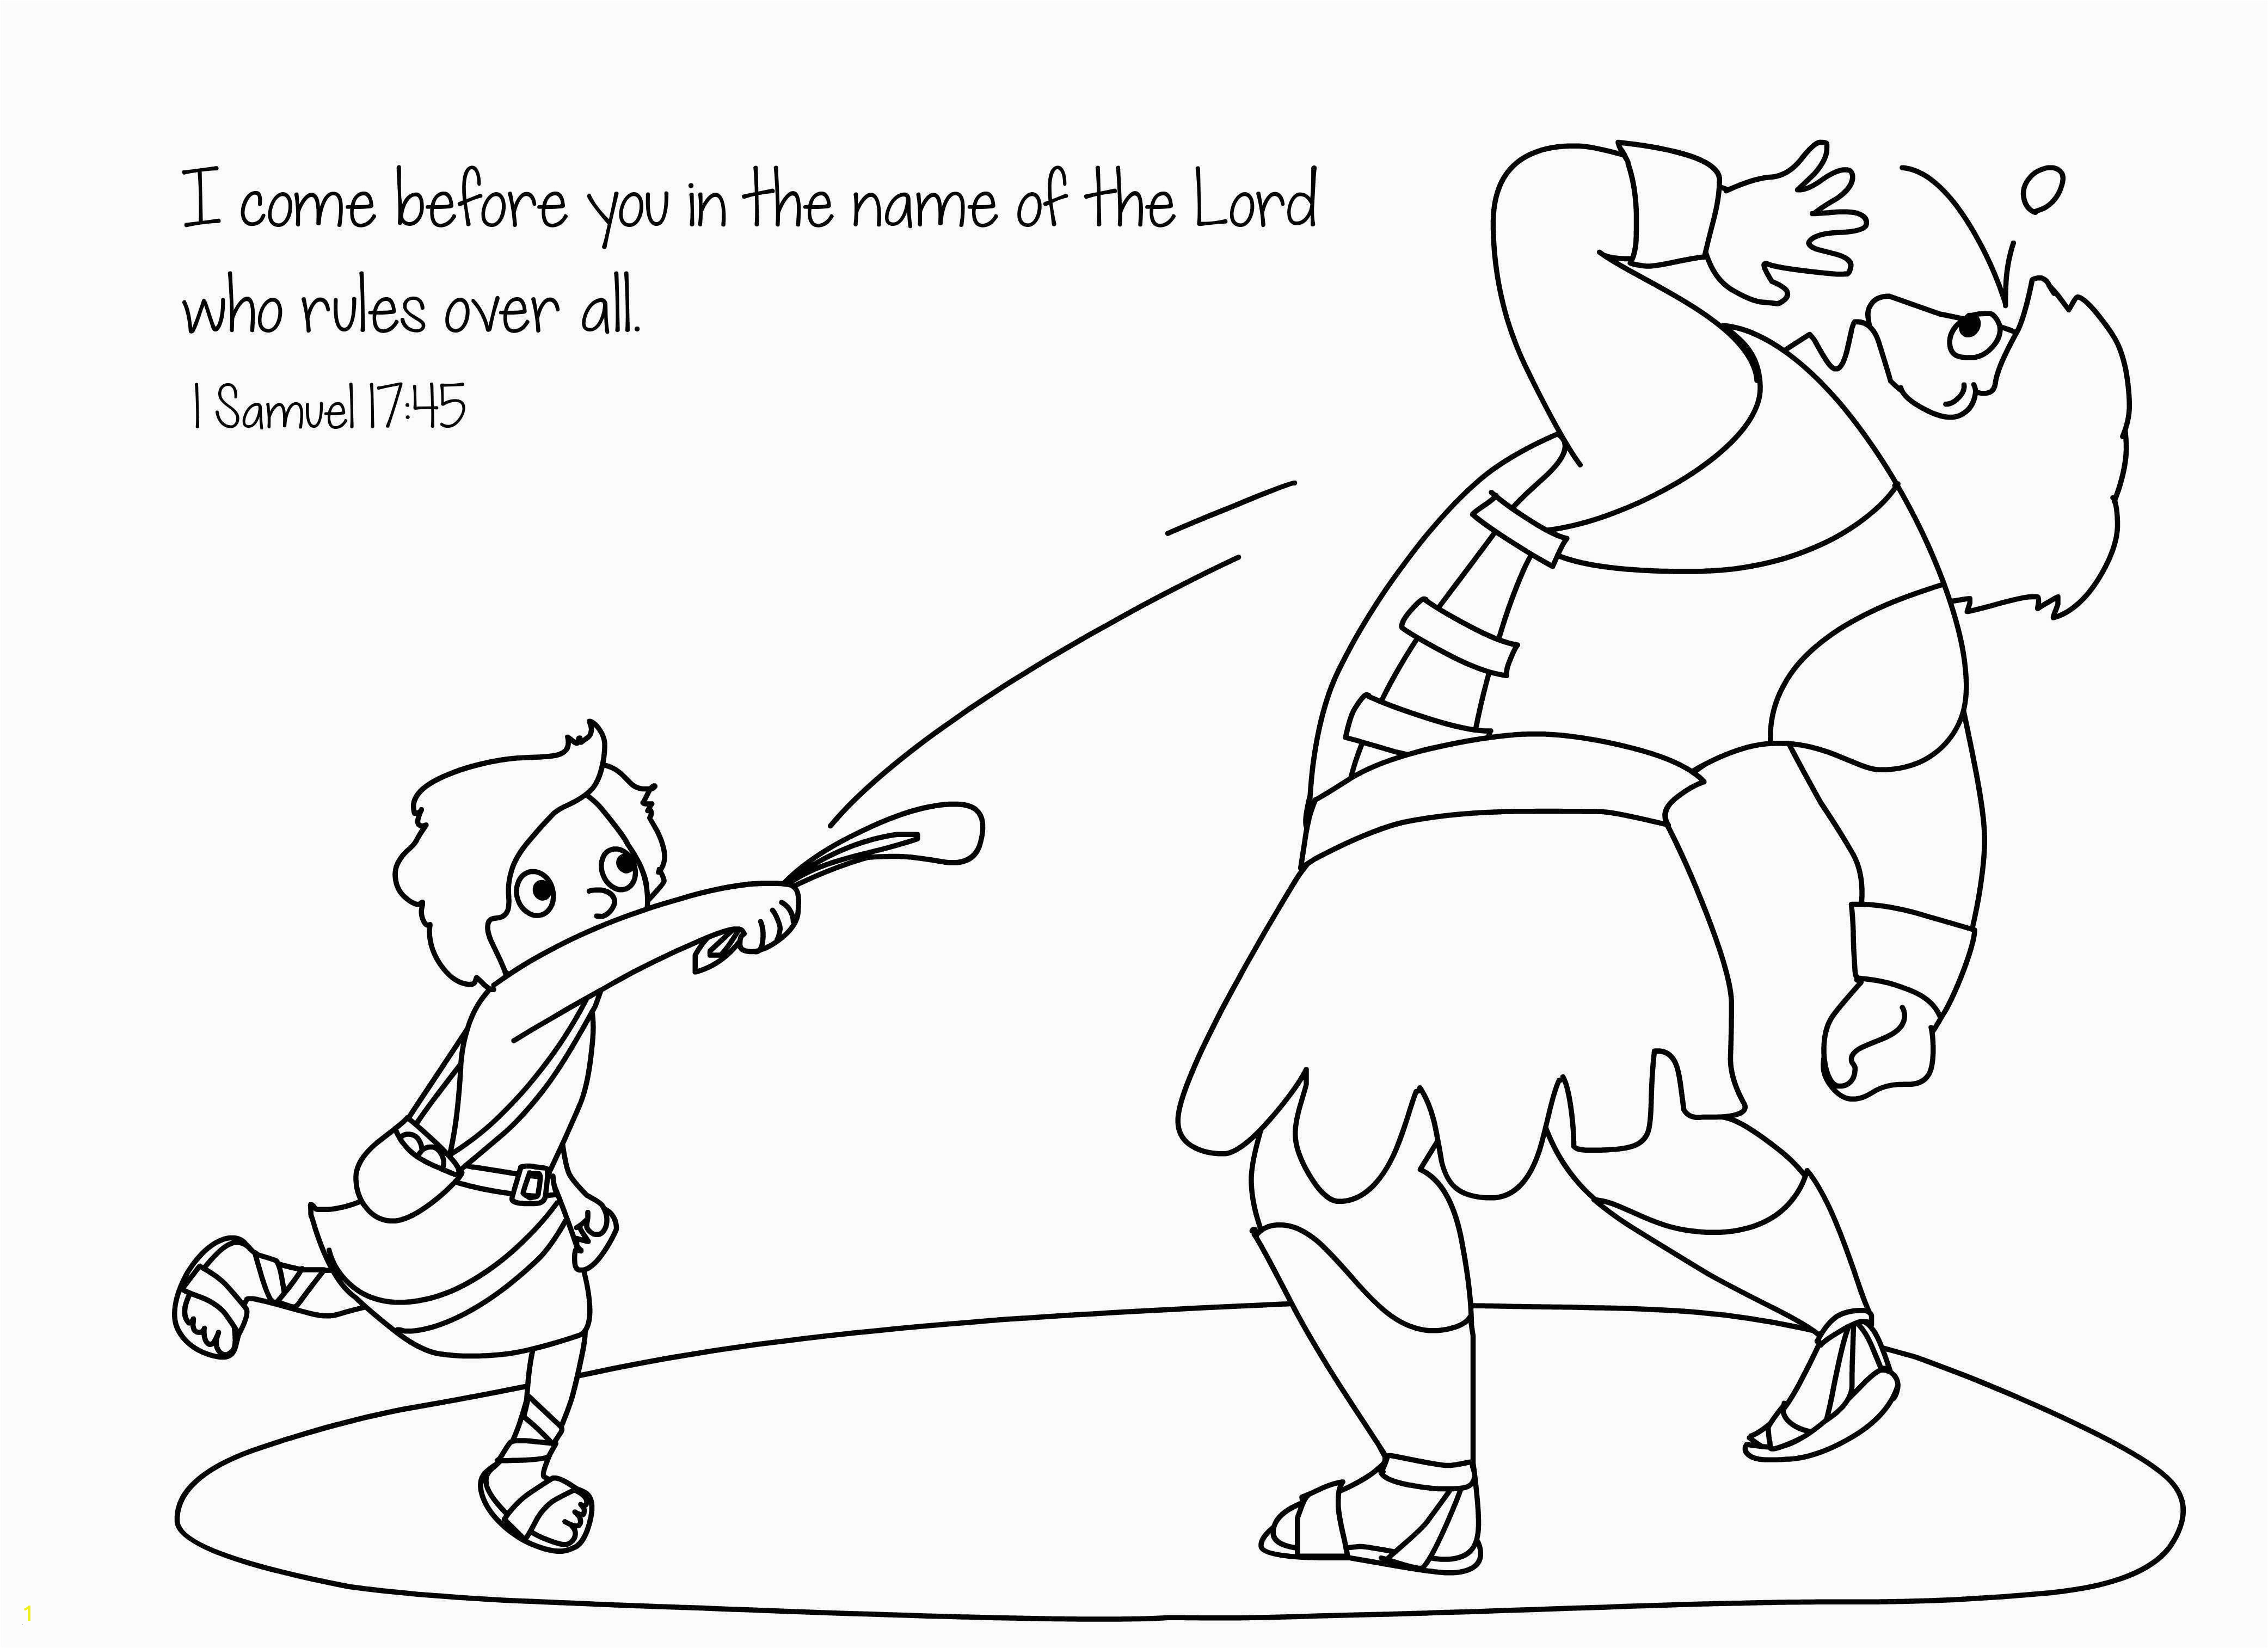 David and Goliath Coloring Pages for toddlers David and Goliath Coloring Page Coloring Pages Coloring Pages